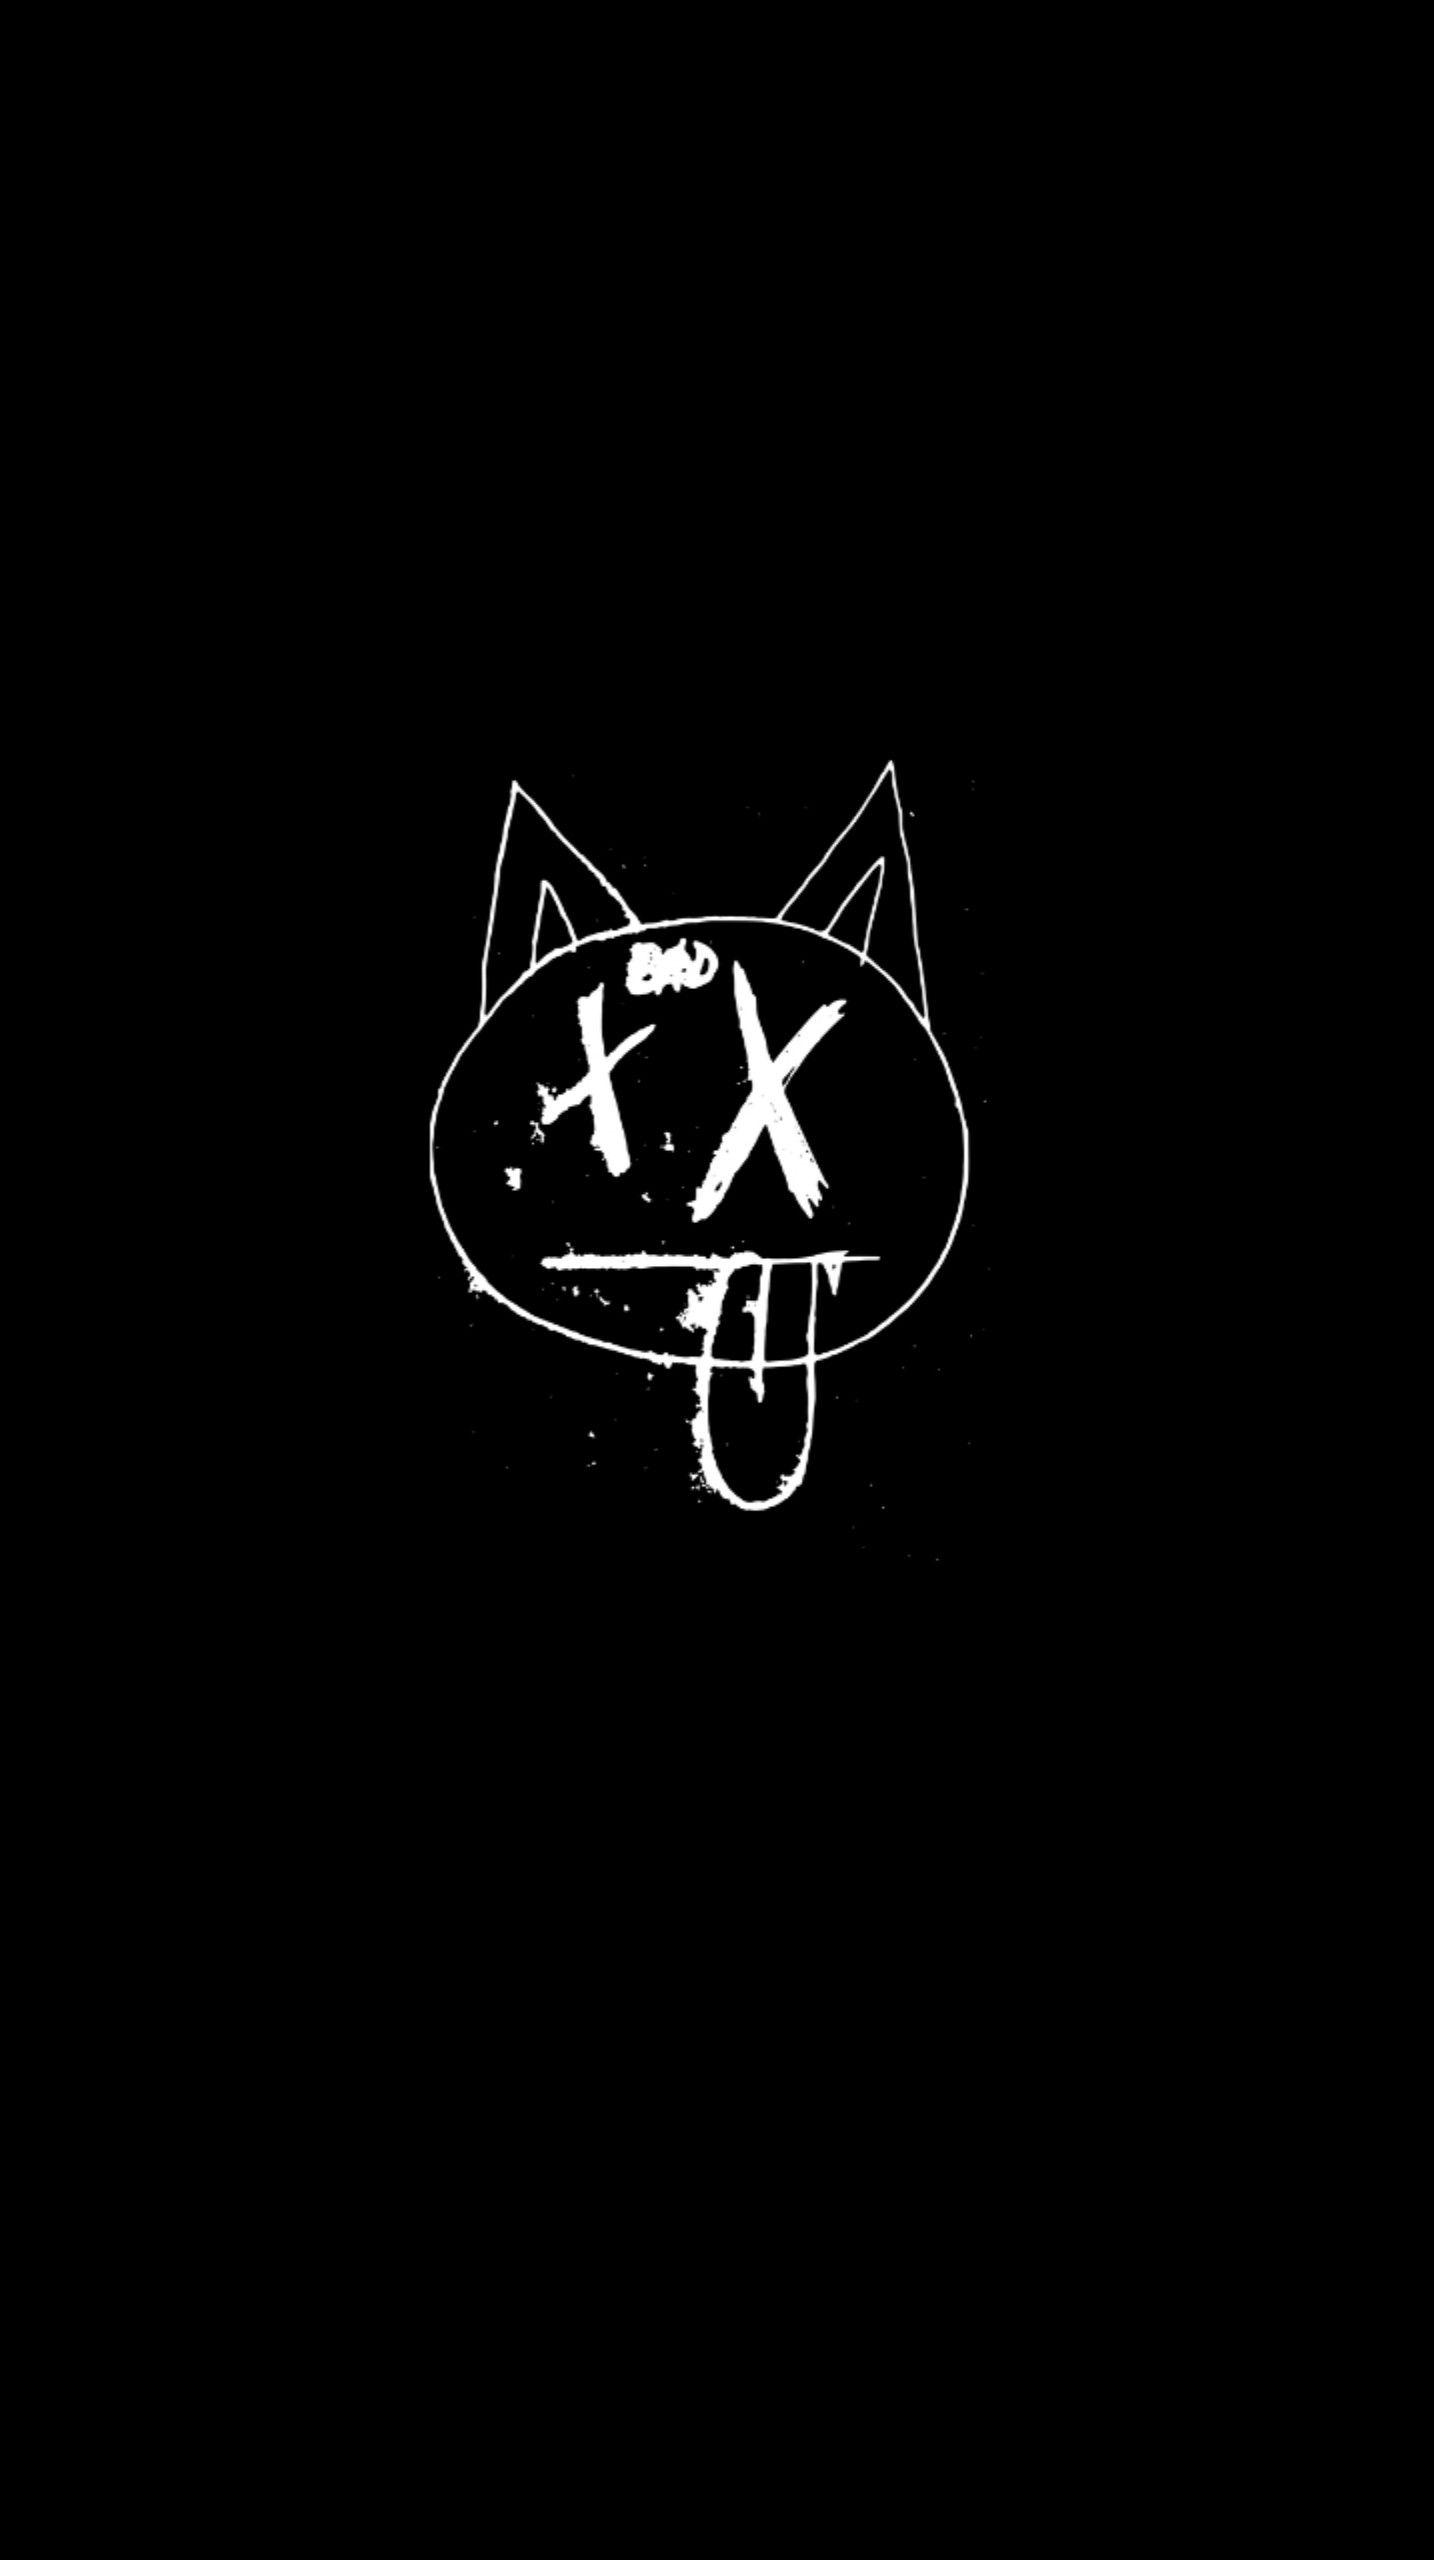 Free download XXXTENTACION BAD VIBES FOREVER CAT x in 2019